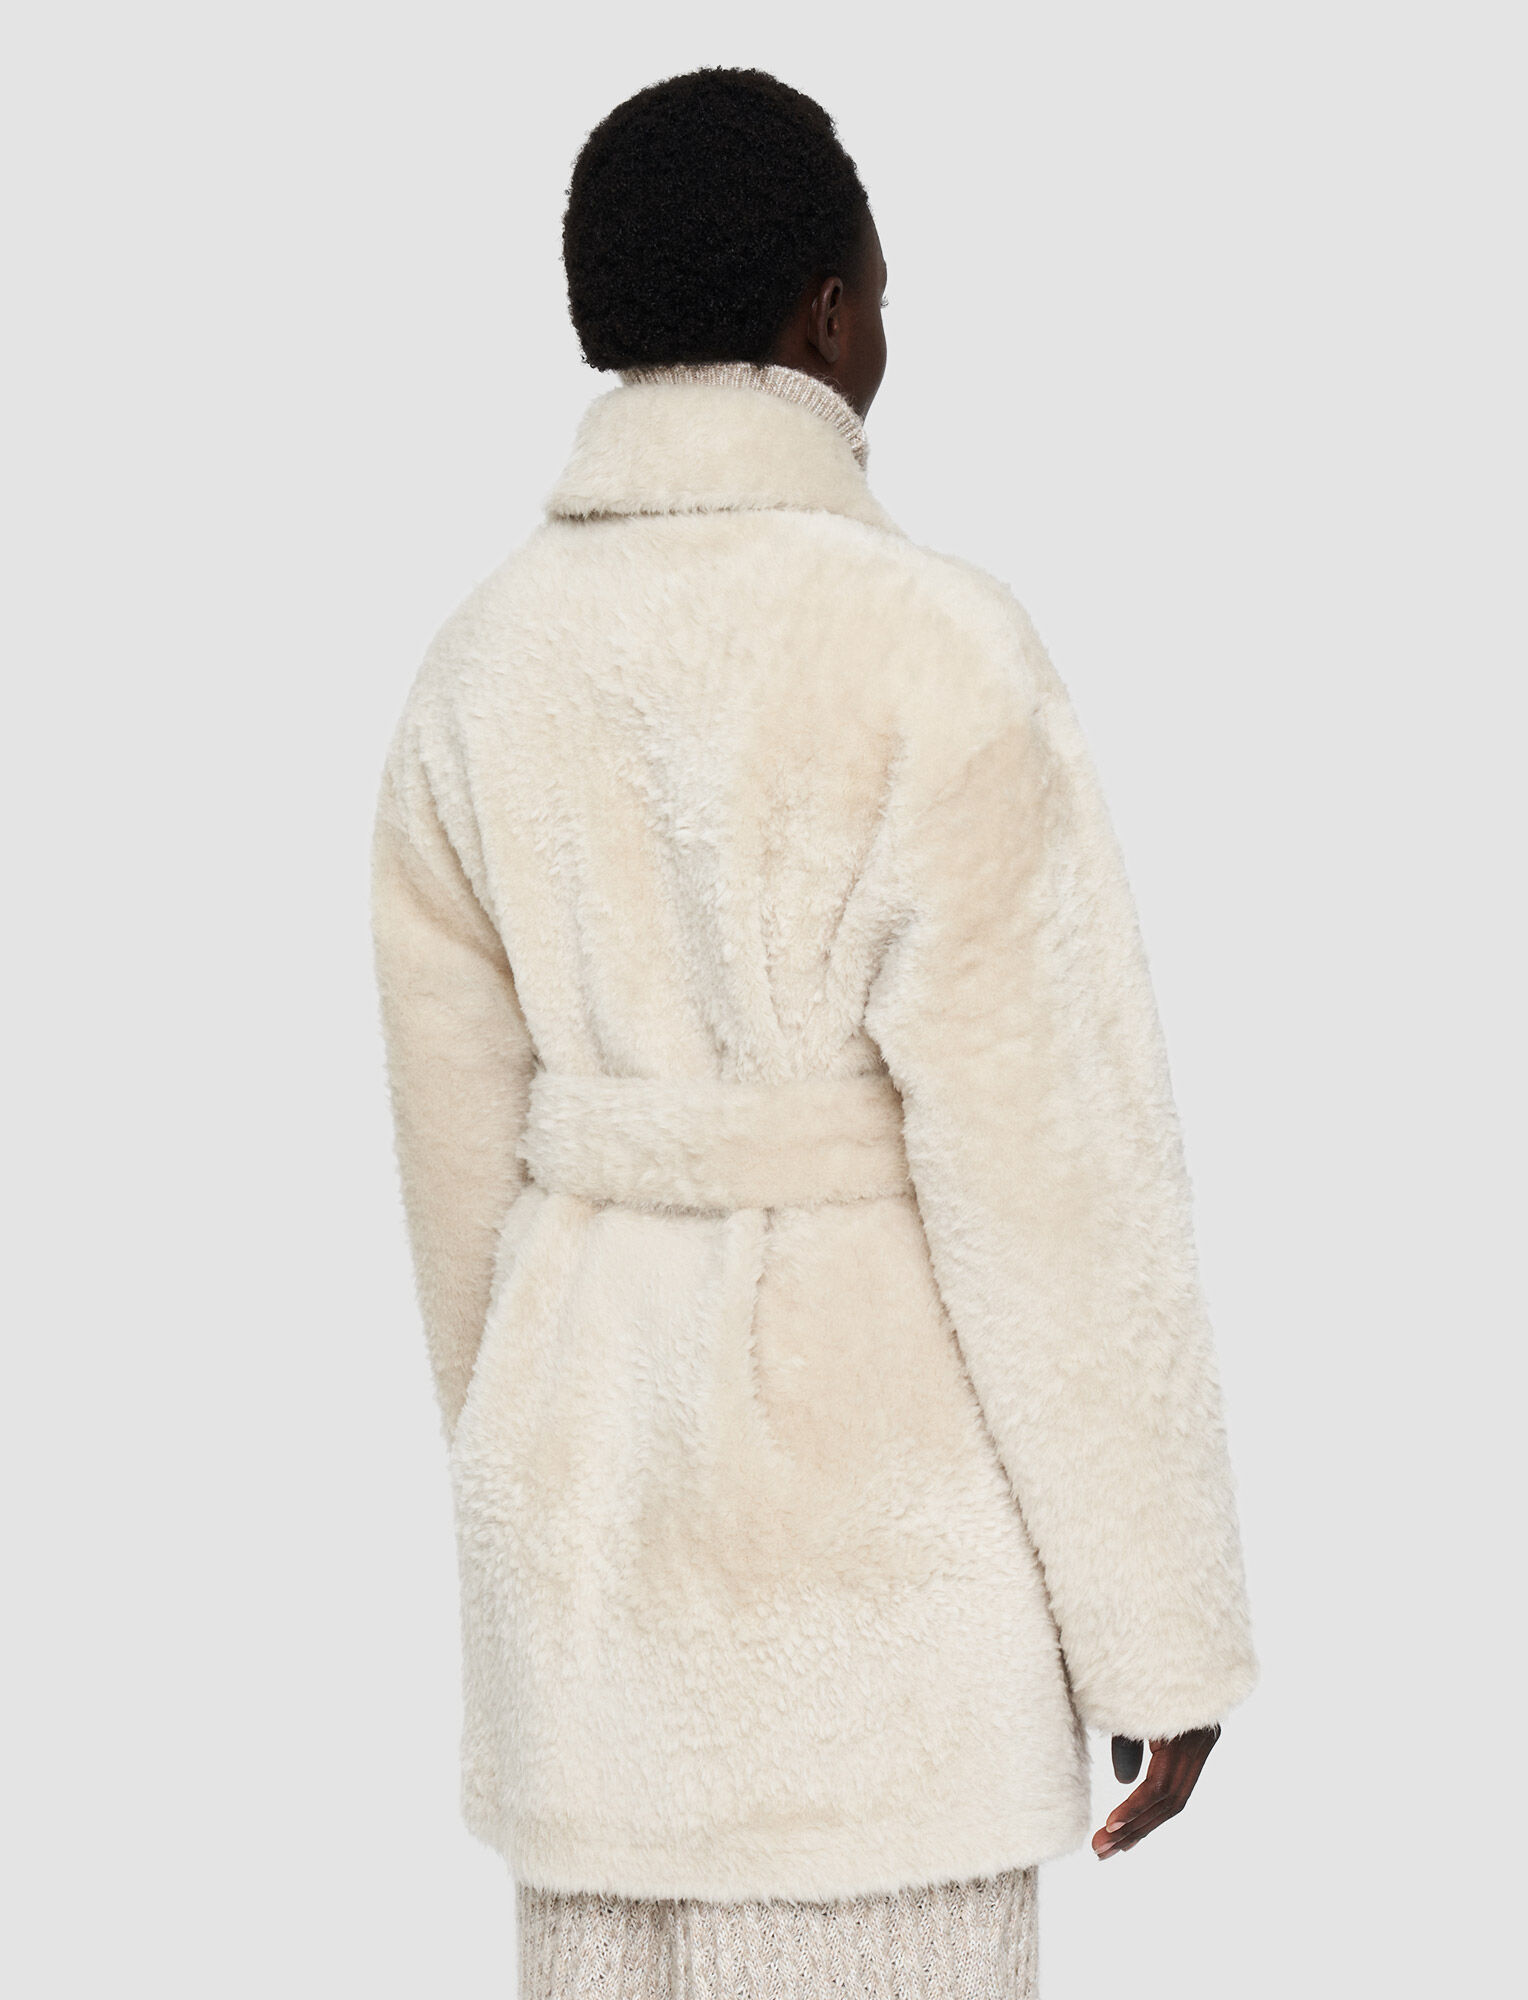 Joseph, Textured Shearling Clery Coat, in Natural